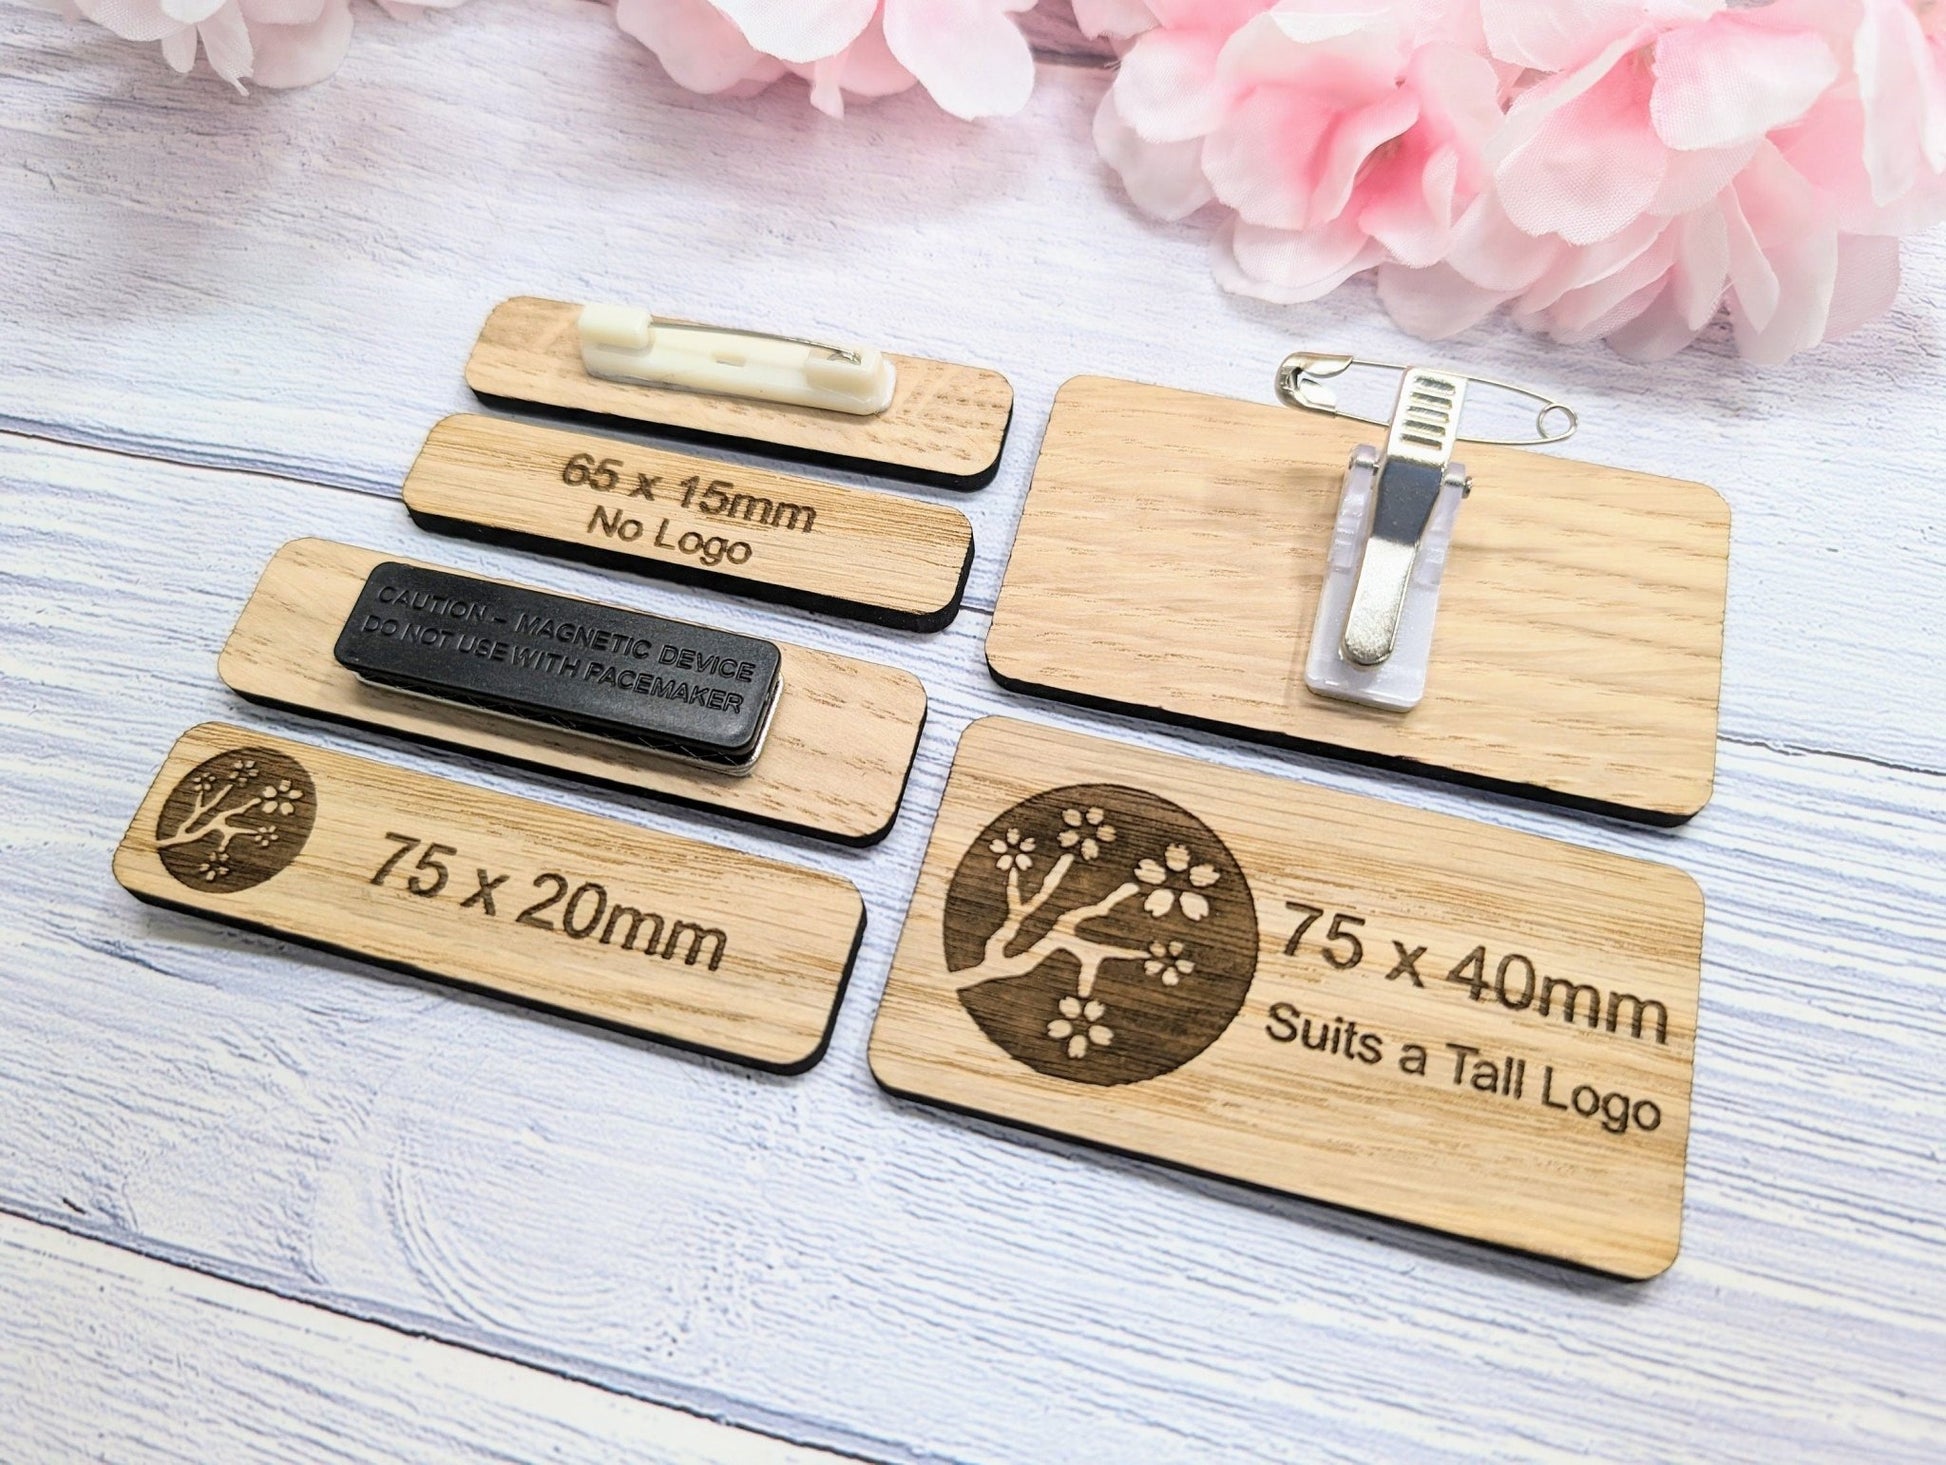 Custom Oak Veneered Name Badges - Business & Retail, Eco-Friendly, Multiple Sizes/Attachments, Personalized for Cafes, Charities - CherryGroveCraft